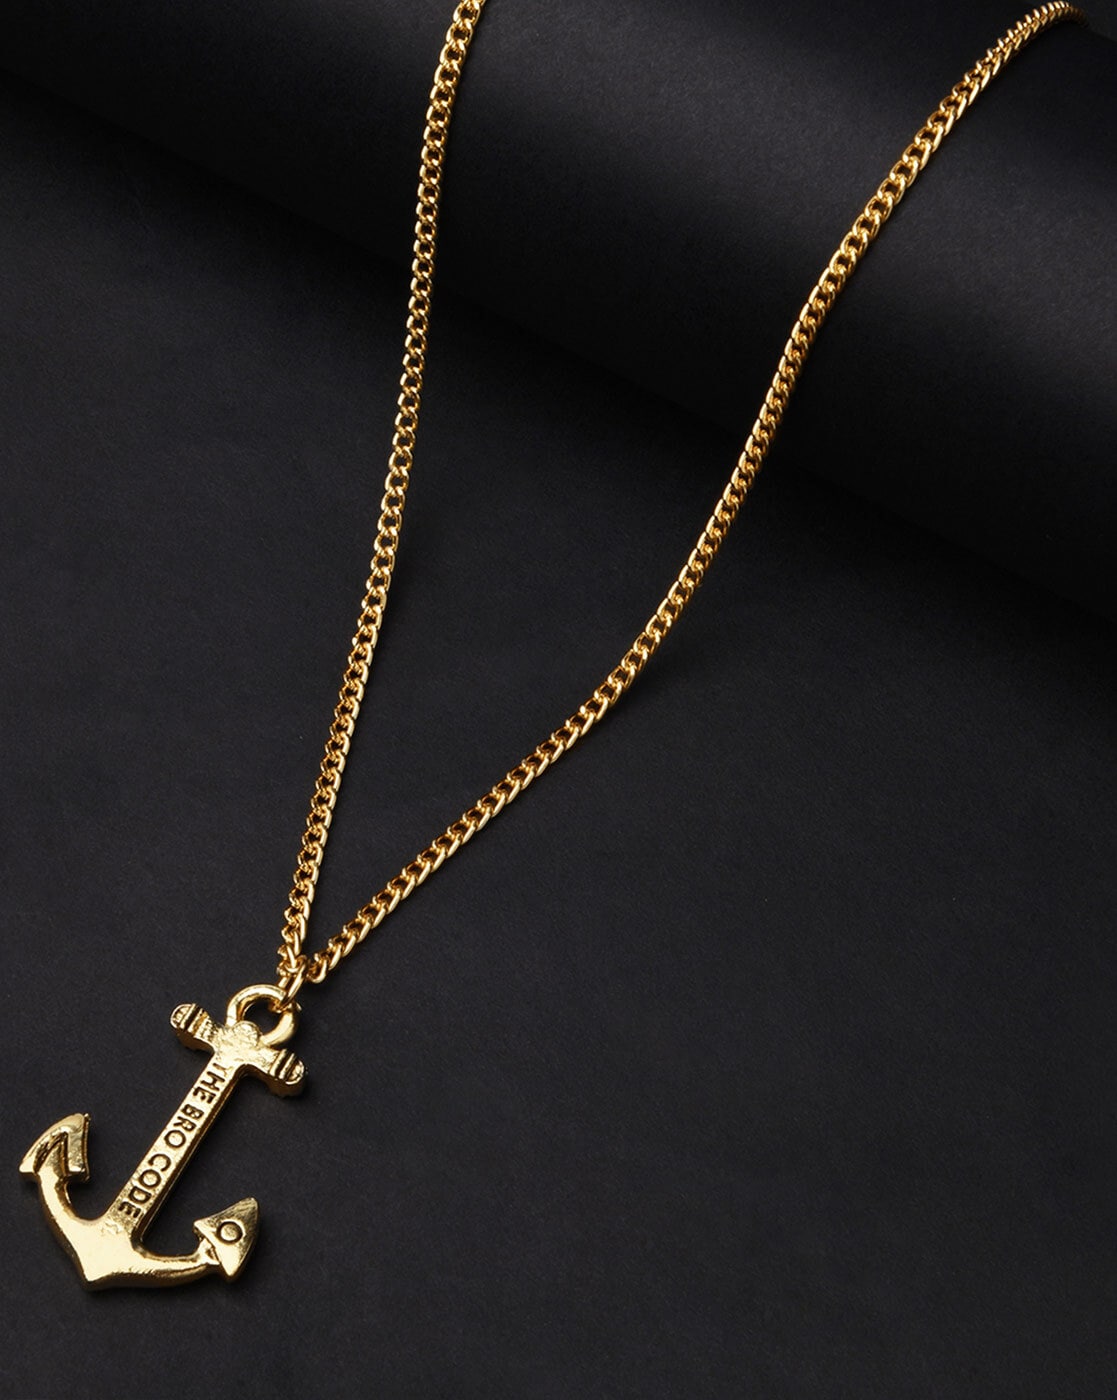 Men's Personalised Anchor Necklace | Posh Totty Designs